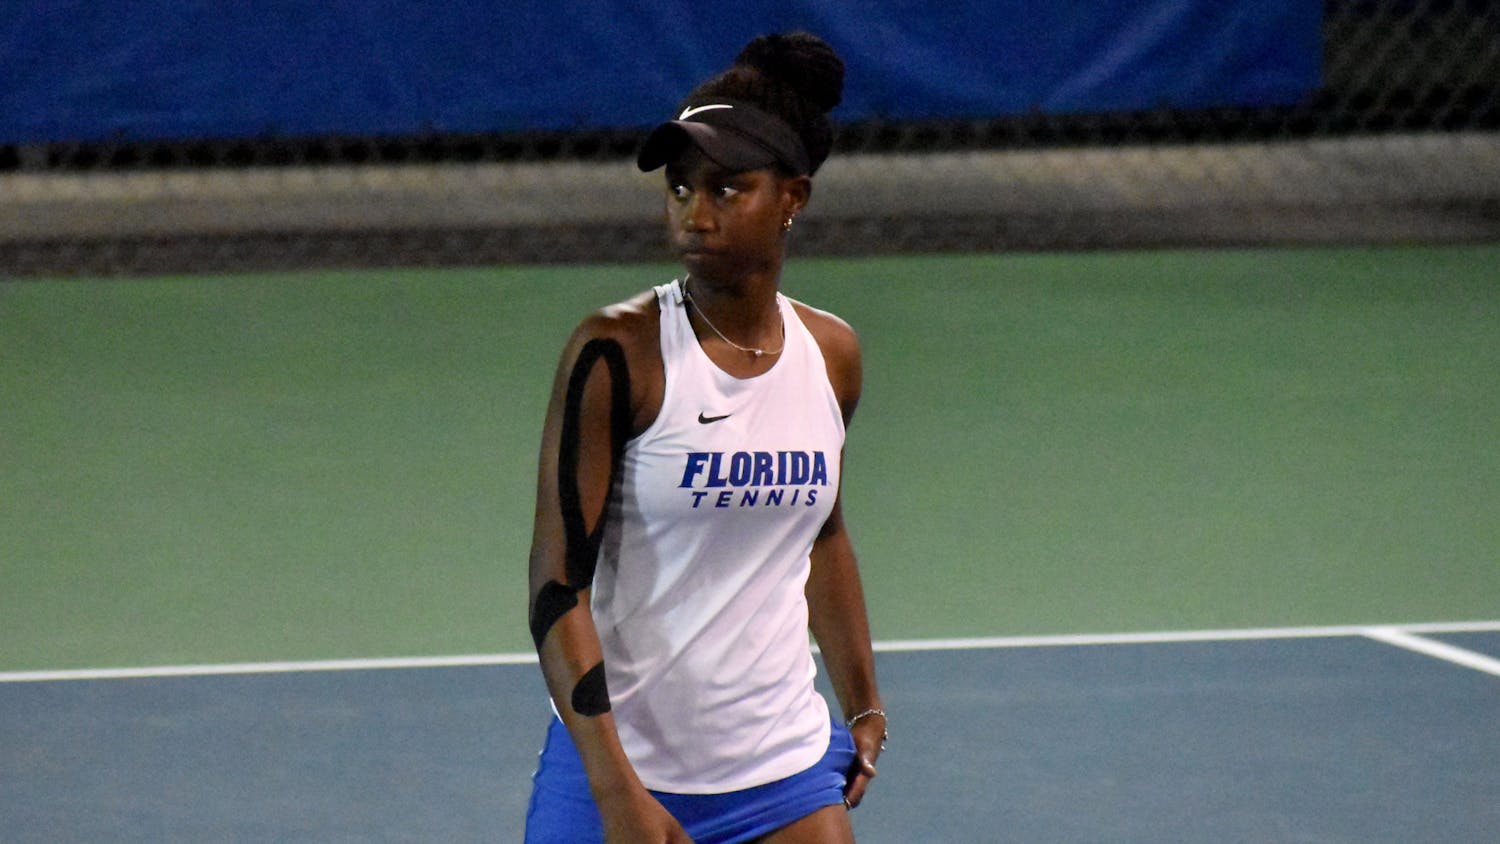 Florida's Marlee Zein on the court during a match against UCF on Feb. 9.